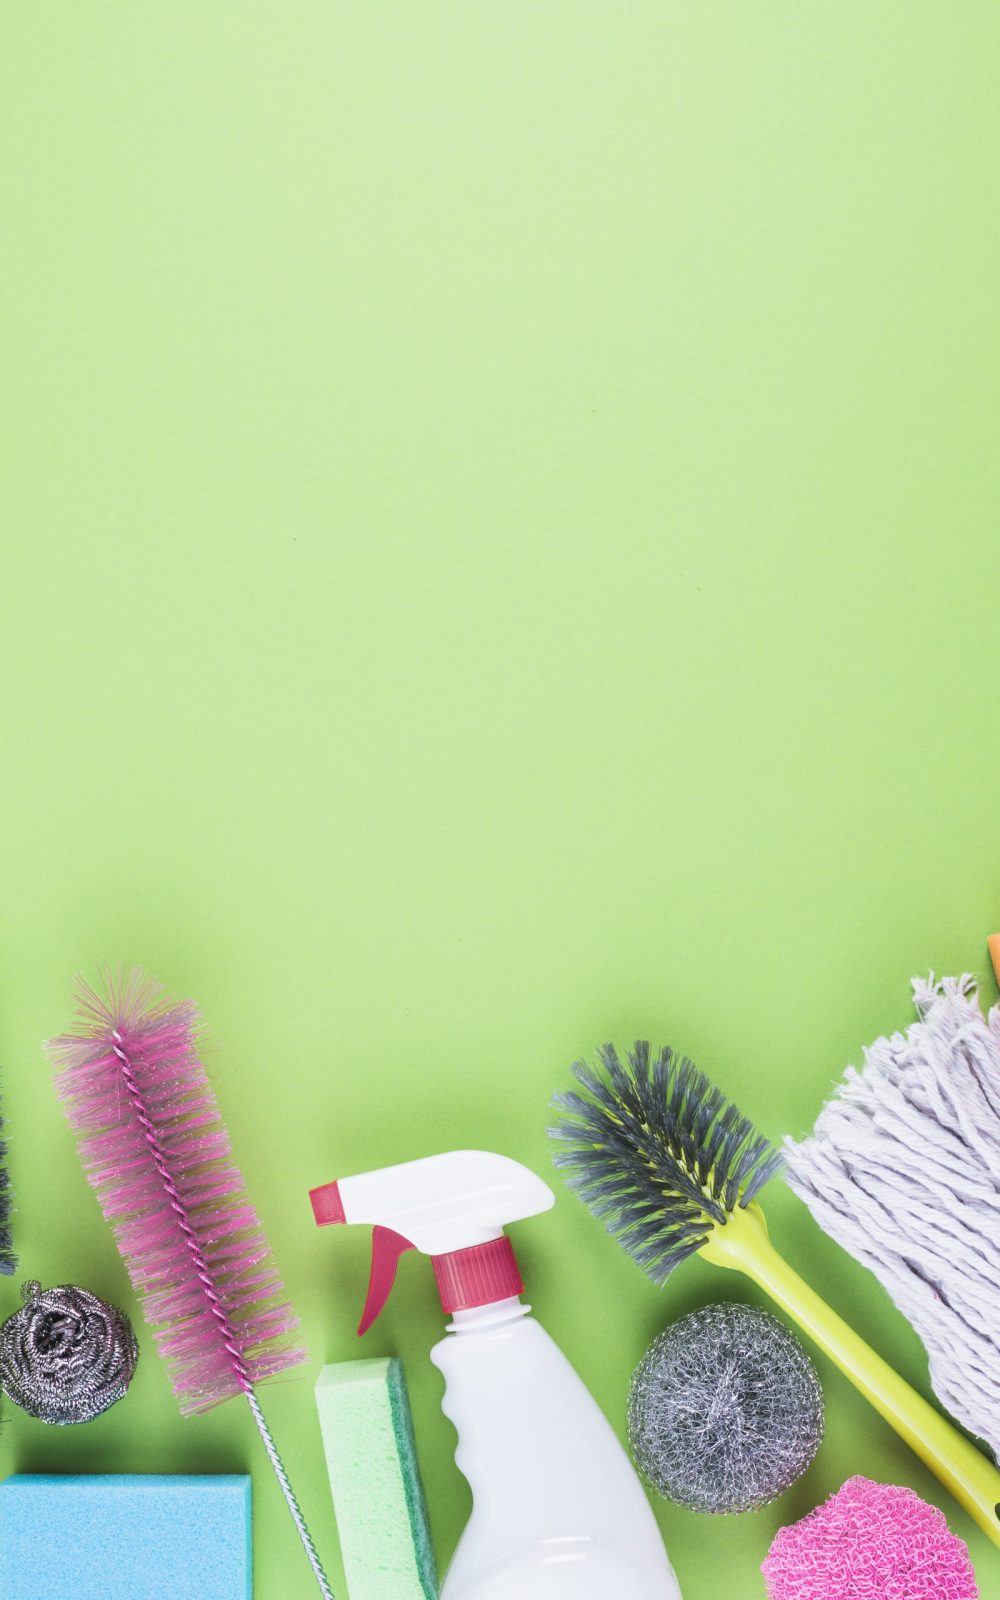 cleaning-equipments-bottom-green-background